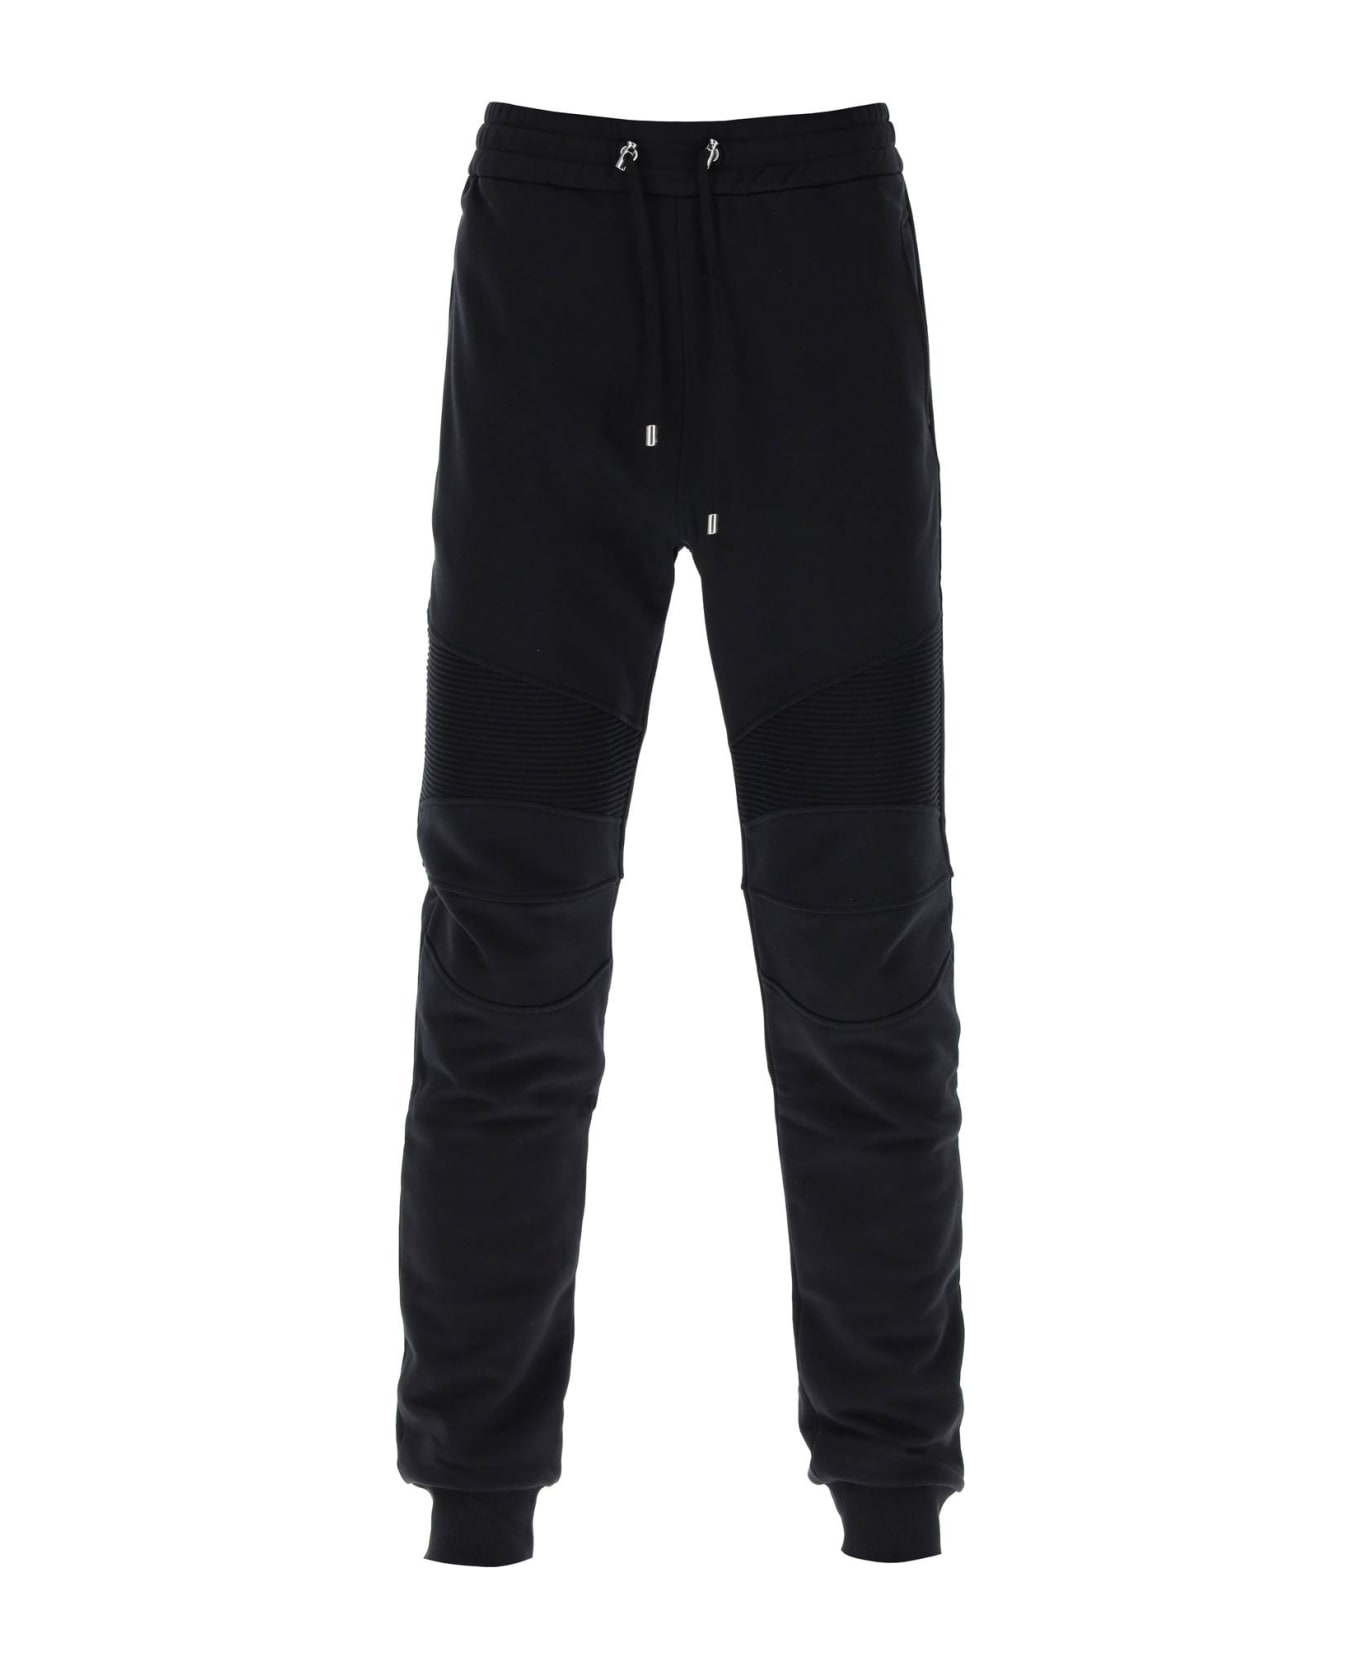 Balmain Joggers With Topstitched Inserts - Noir/blanc